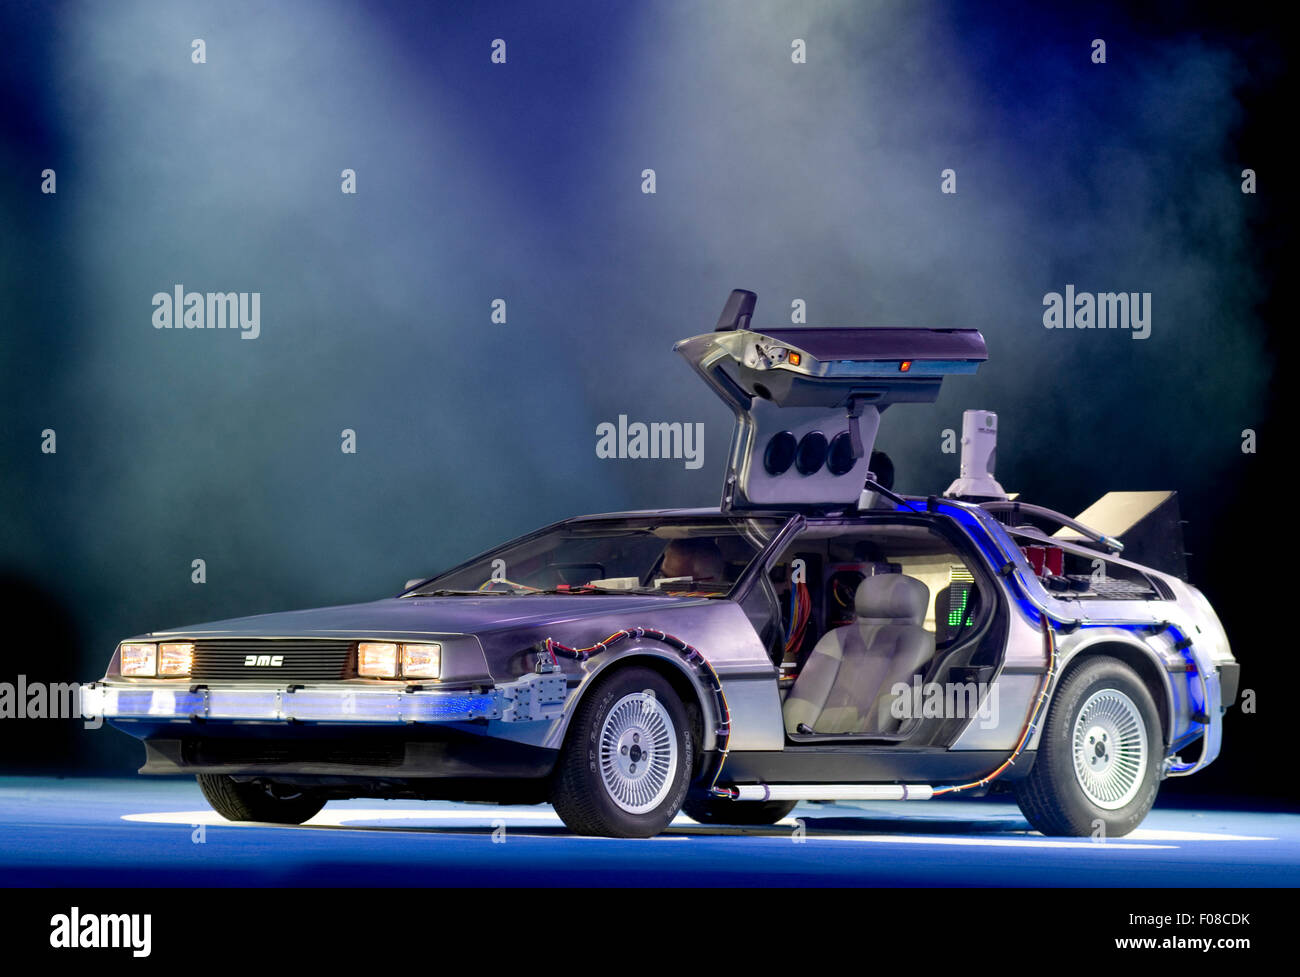 Replica time machine car from Back to the Future on stage at The Gadget Show. Stock Photo